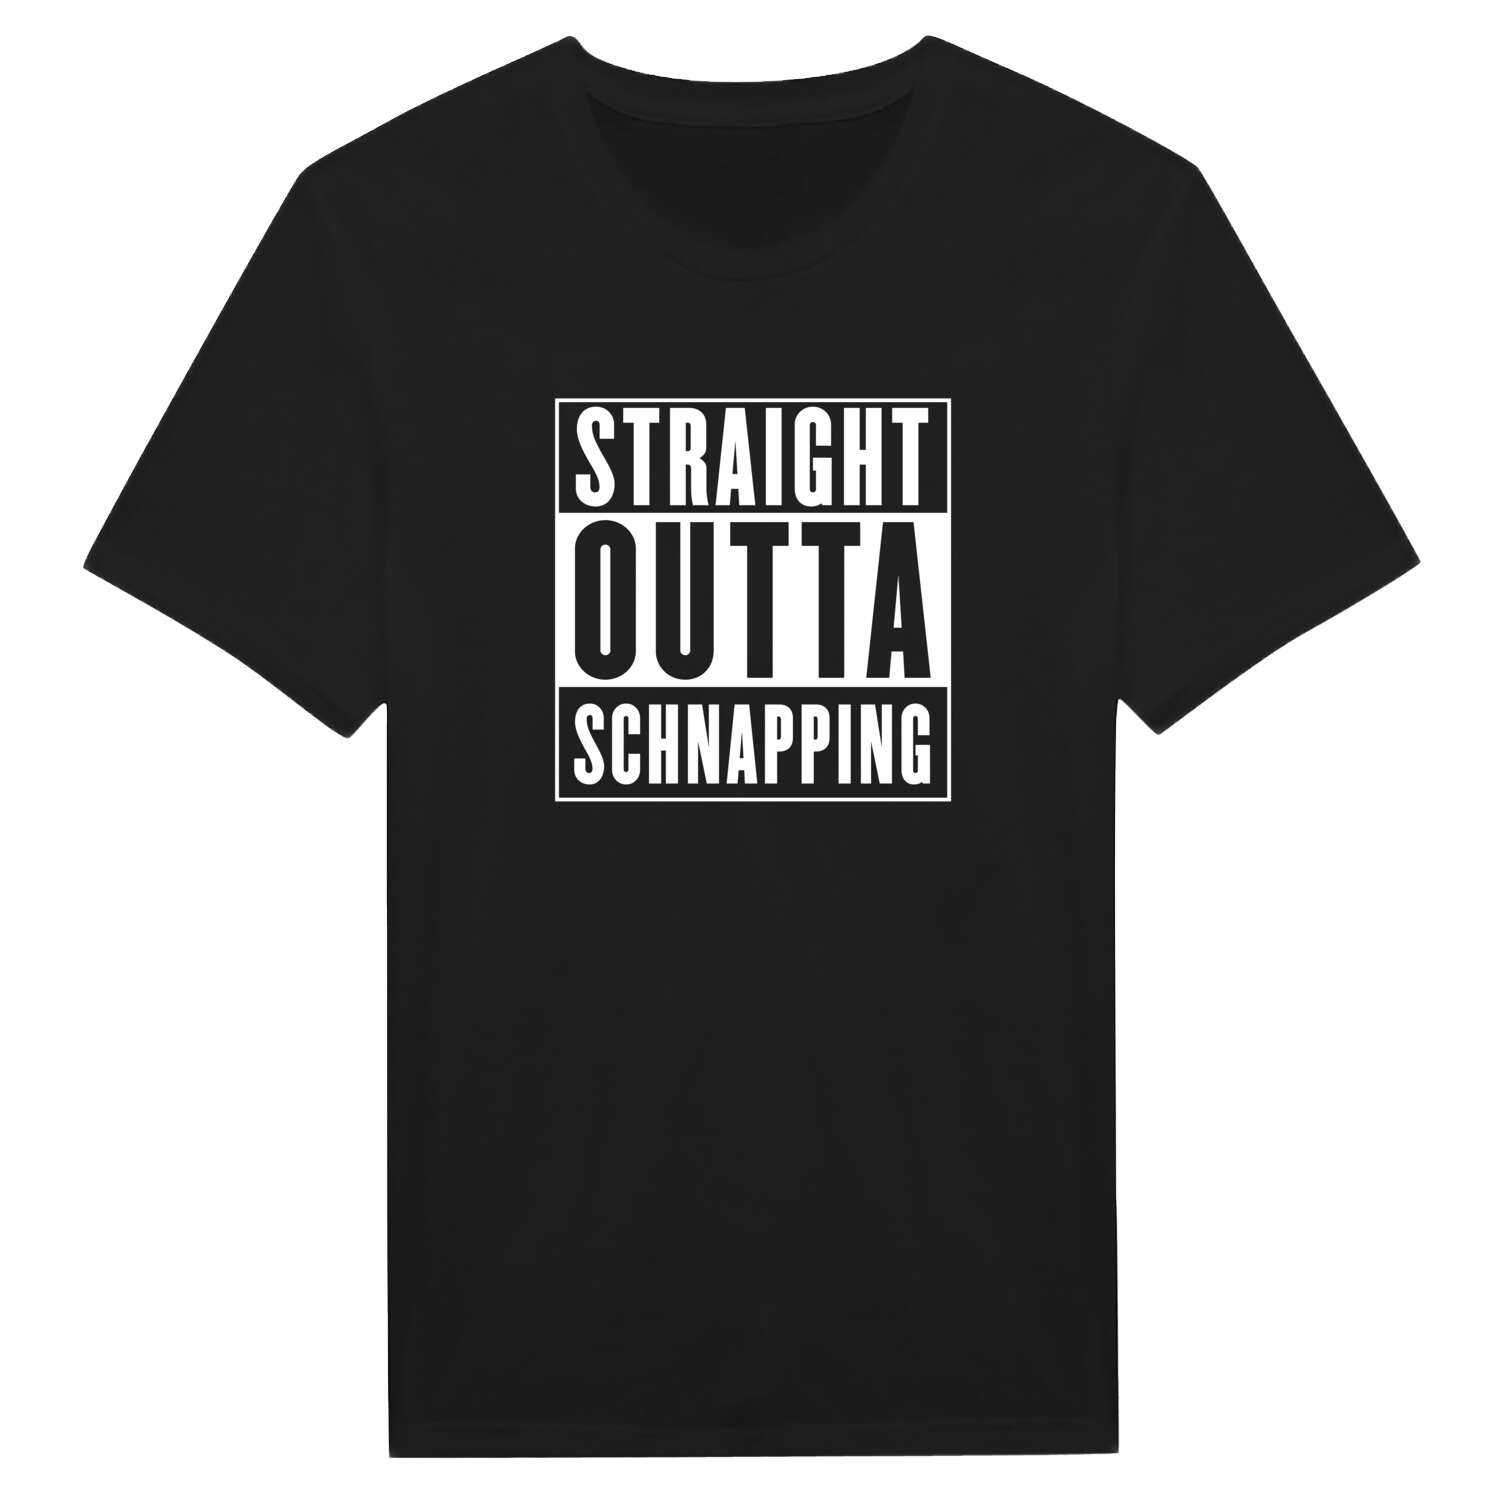 Schnapping T-Shirt »Straight Outta«